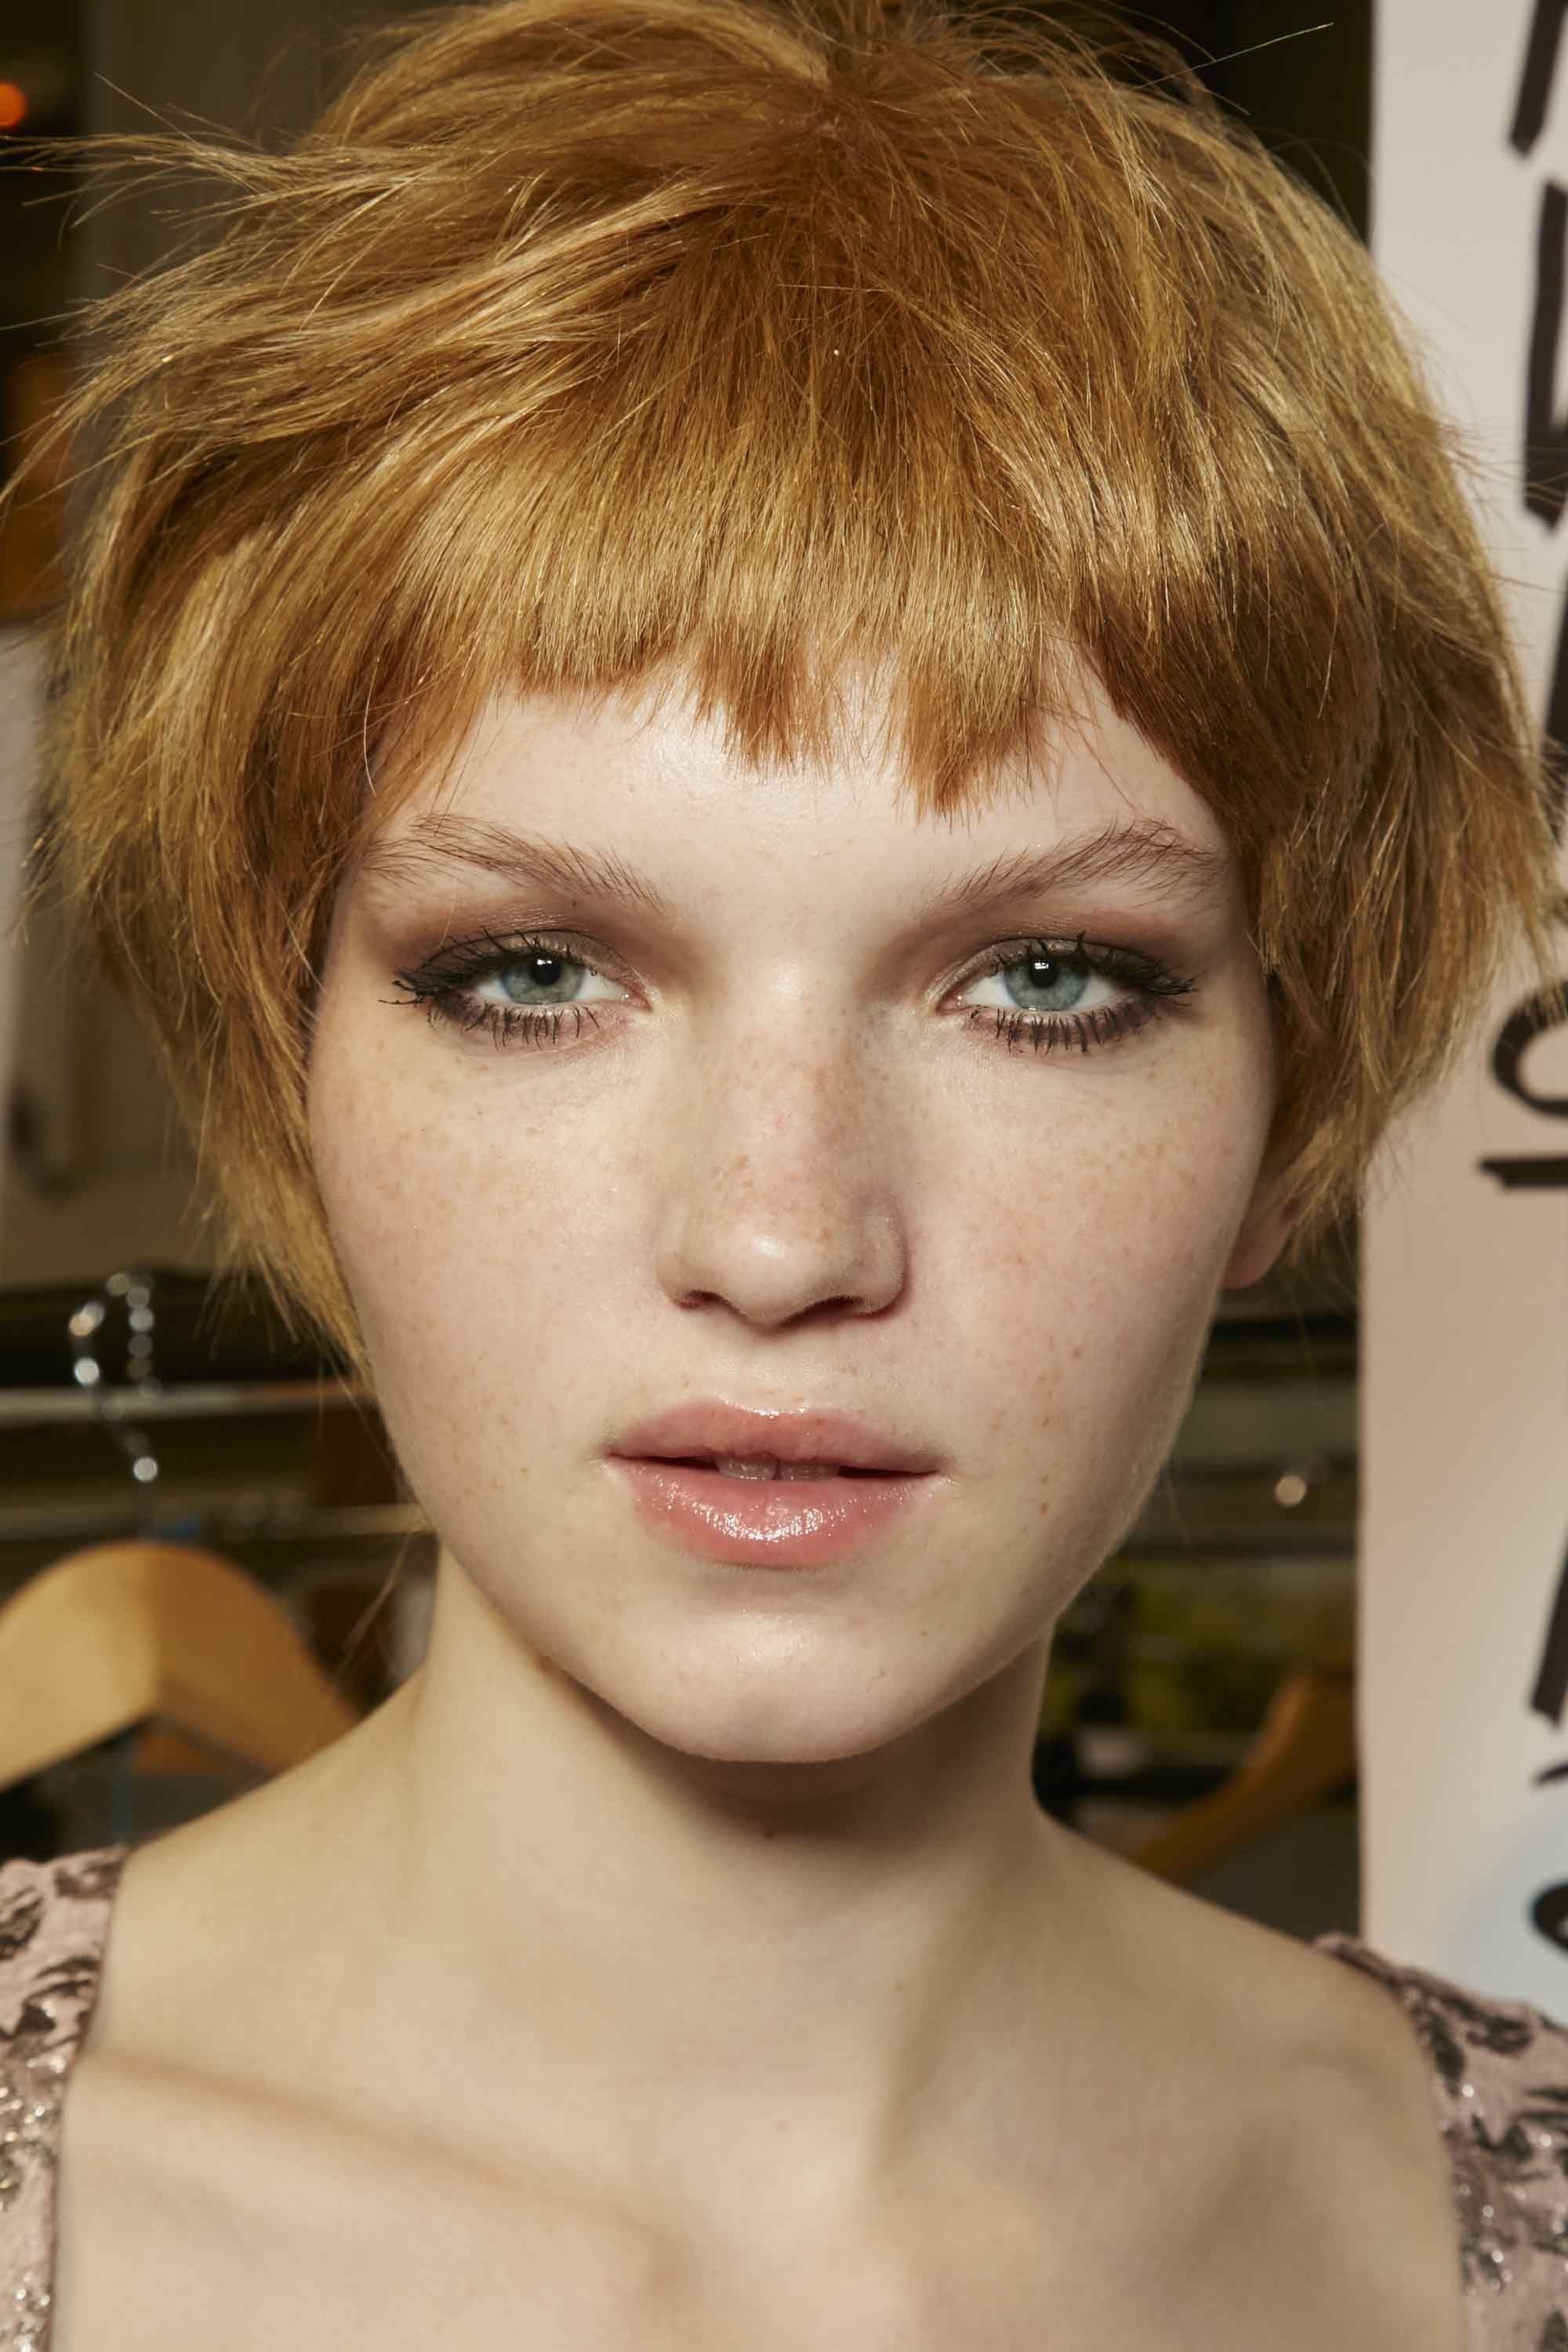 Pixie Cuts For Oval Faces: 5 Directional Looks To Try Now Within Best And Newest Choppy Bowl Cut Pixie Haircuts (View 5 of 15)